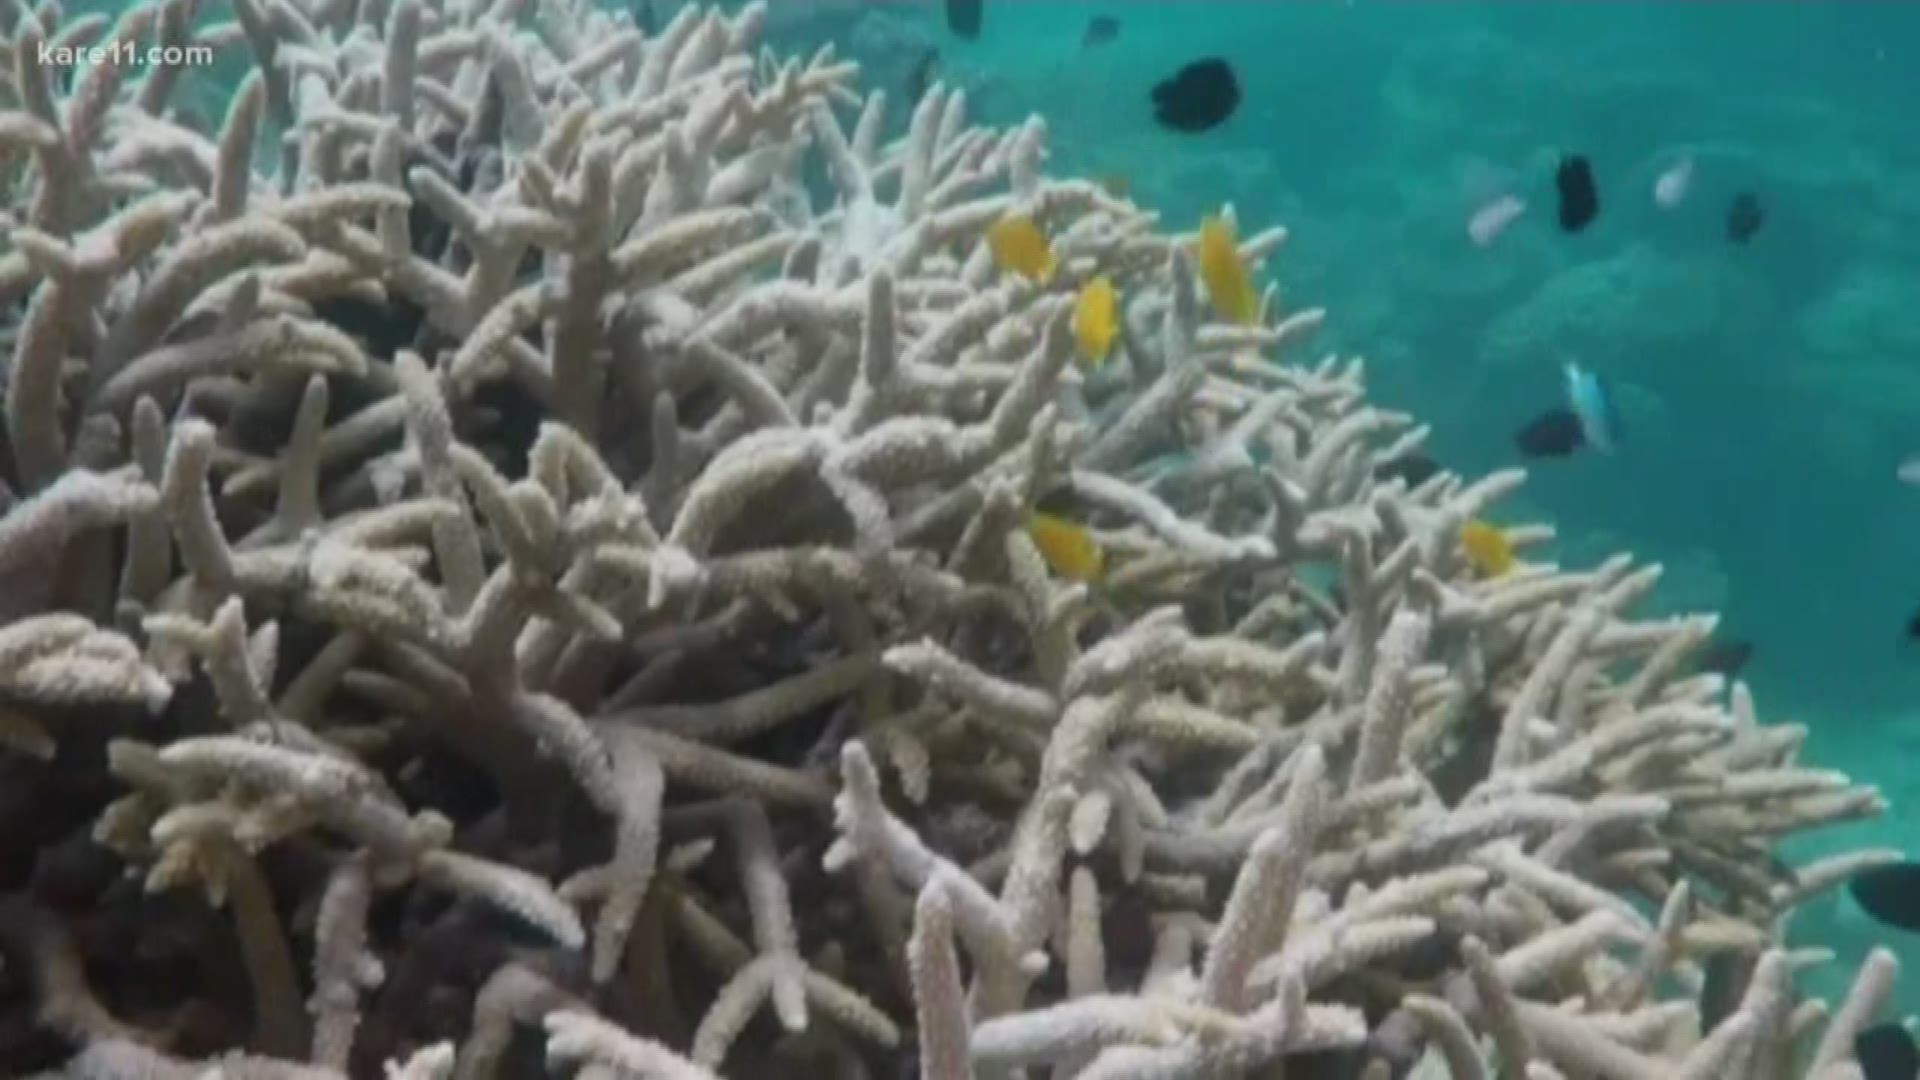 Parts of the Reef continue to die off as the ocean warms.